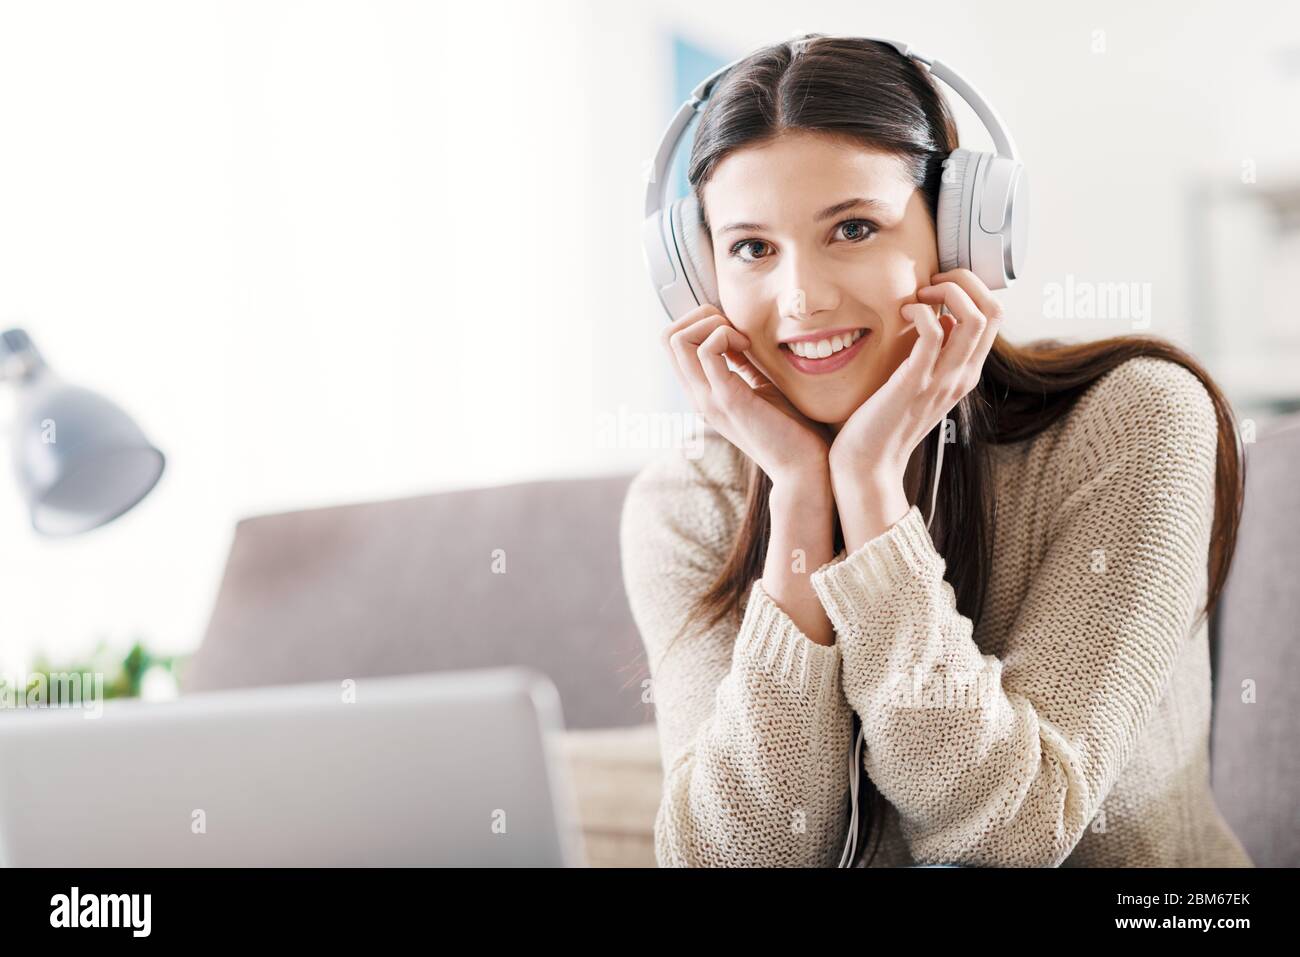 Young smiling woman at home relaxing on the sofa, she is using a laptop and listening to music using headphones Stock Photo